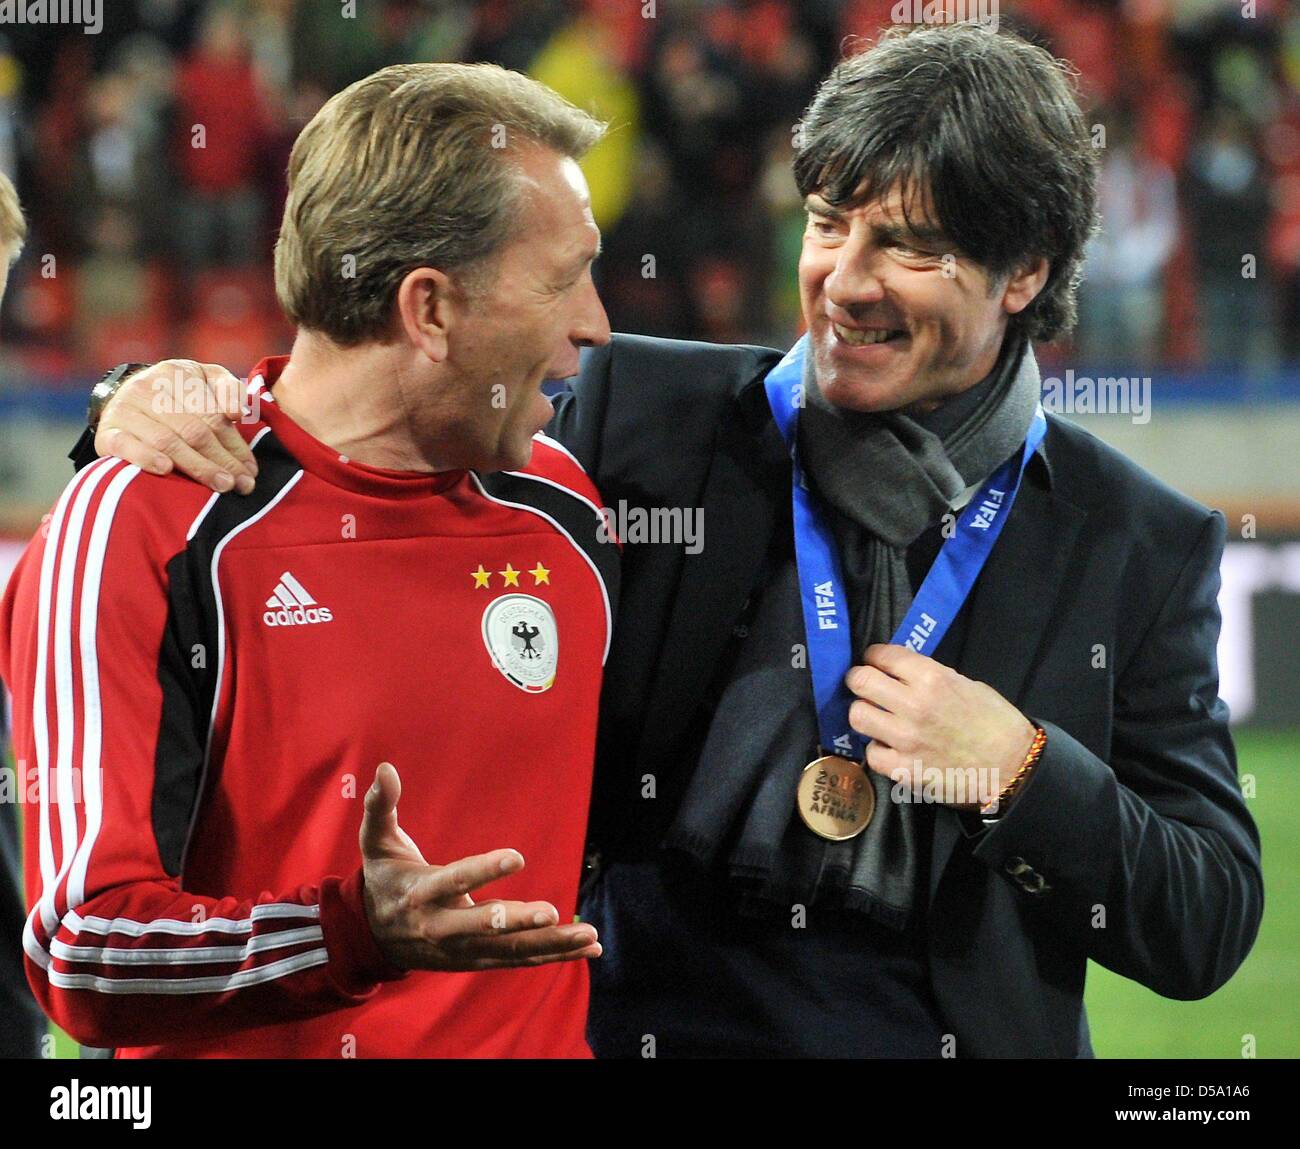 German headcoach Joachim Loew (R) and goalkeeper coach Andreas Koepke celebrate after the 2010 FIFA World Cup third place match between Uruguay and Germany at the Nelson Mandela Bay Stadium in Port Elizabeth, South Africa 10 July 2010. Photo: Bernd Weissbrod dpa - Please refer to http://dpaq.de/FIFA-WM2010-TC  +++(c) dpa - Bildfunk+++ Stock Photo